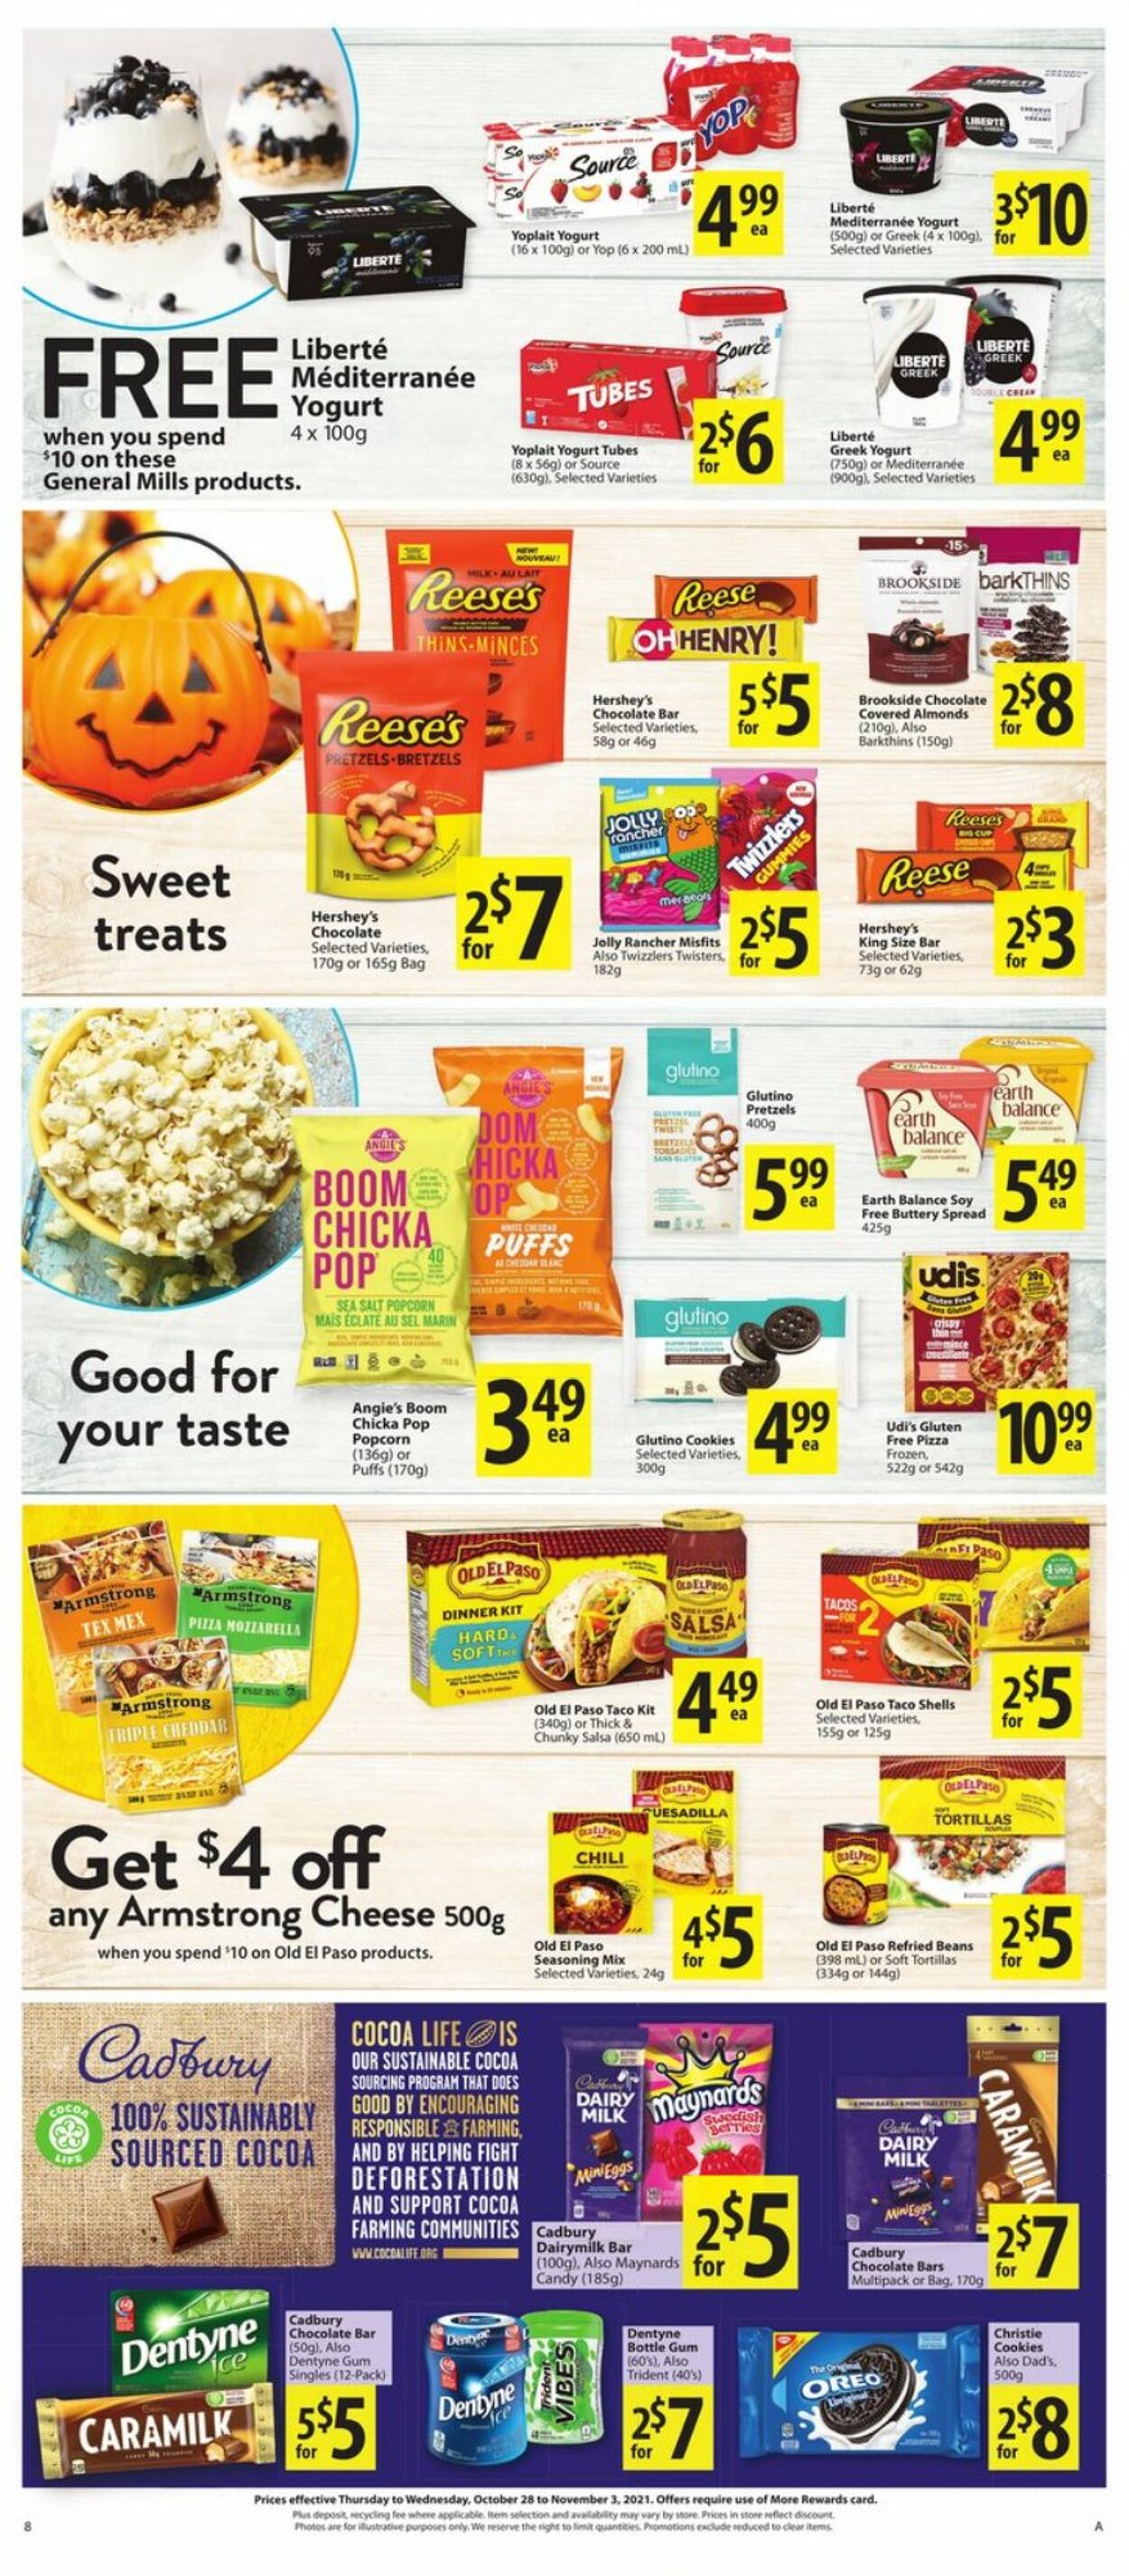 Flyer Save-On-Foods 28.10.2021 - 03.11.2021